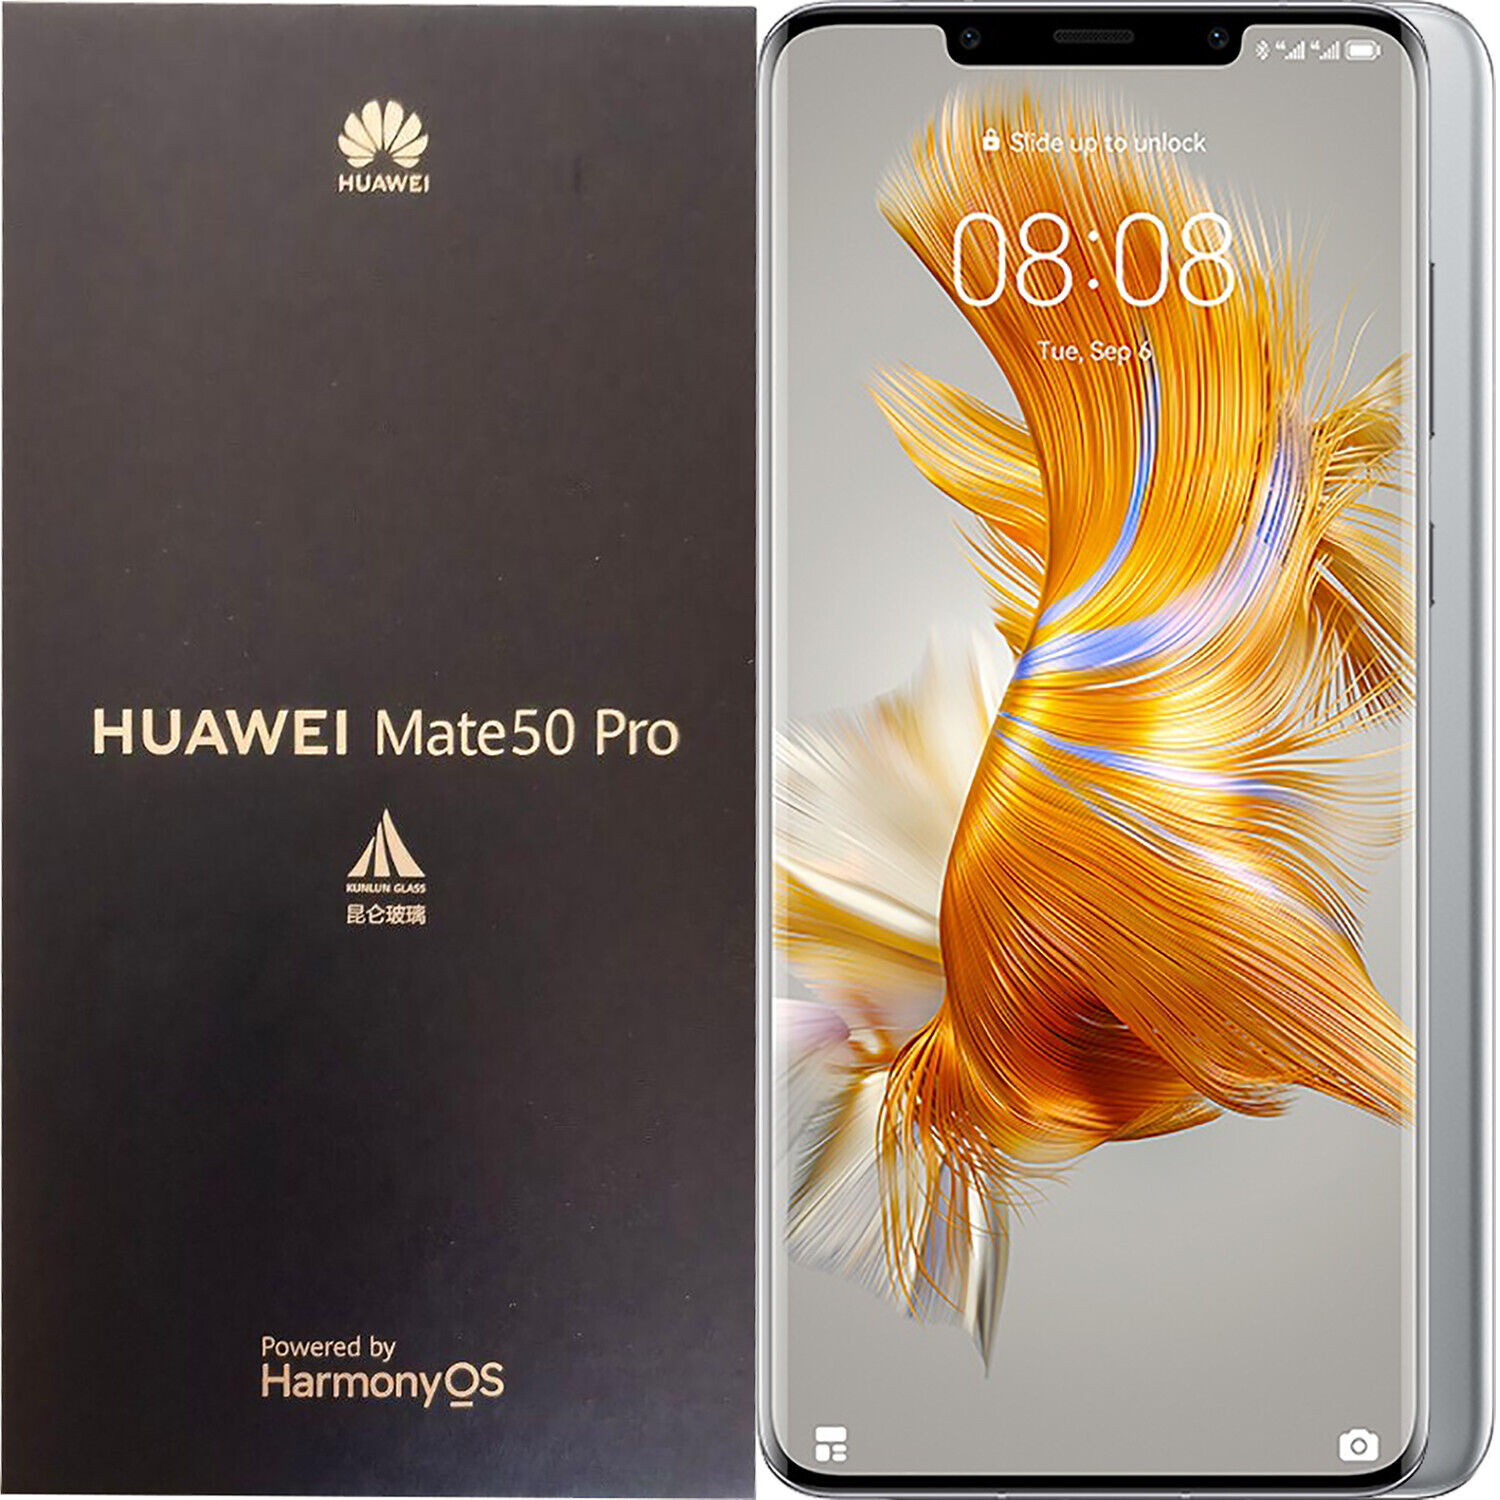 The Price of Huawei Mate 50 Pro 4G Silver 256GB + 8GB Dual-SIM Factory Unlocked GSM NEW | Huawei Phone